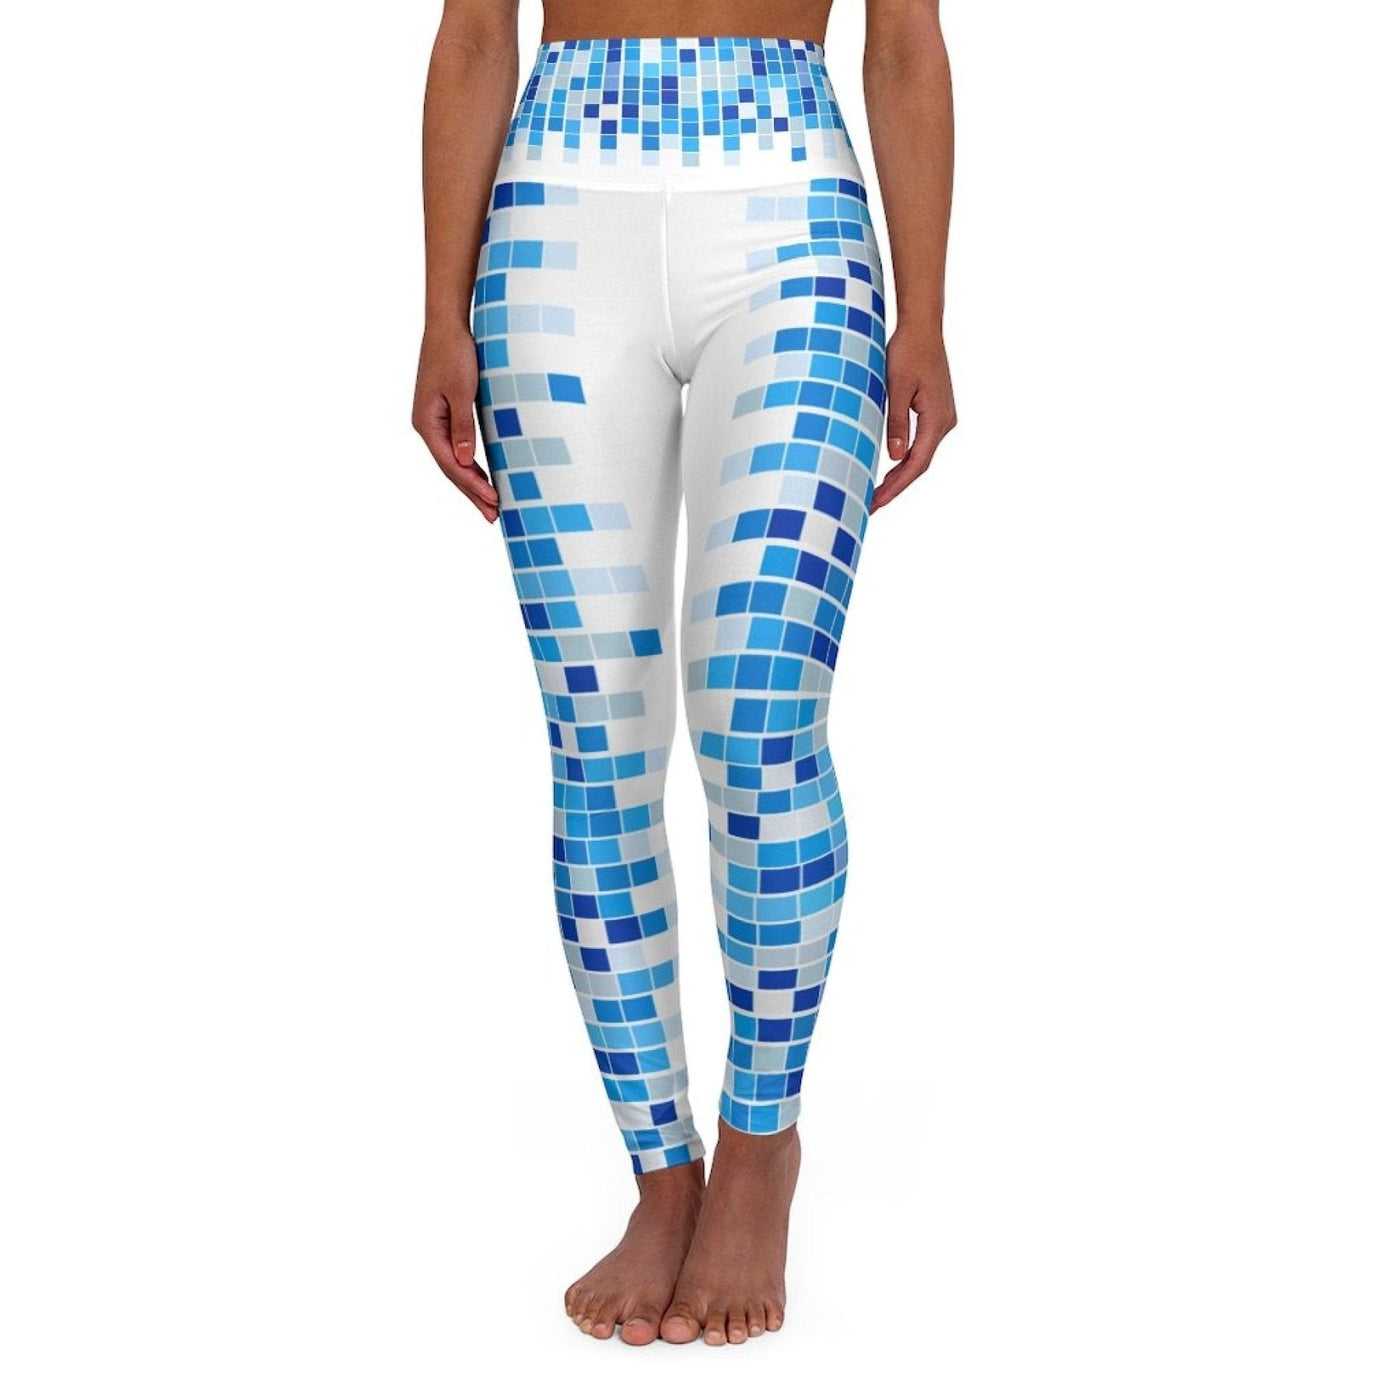 High Waisted Yoga Leggings Blue And White Mosaic Square Style Pants - Womens